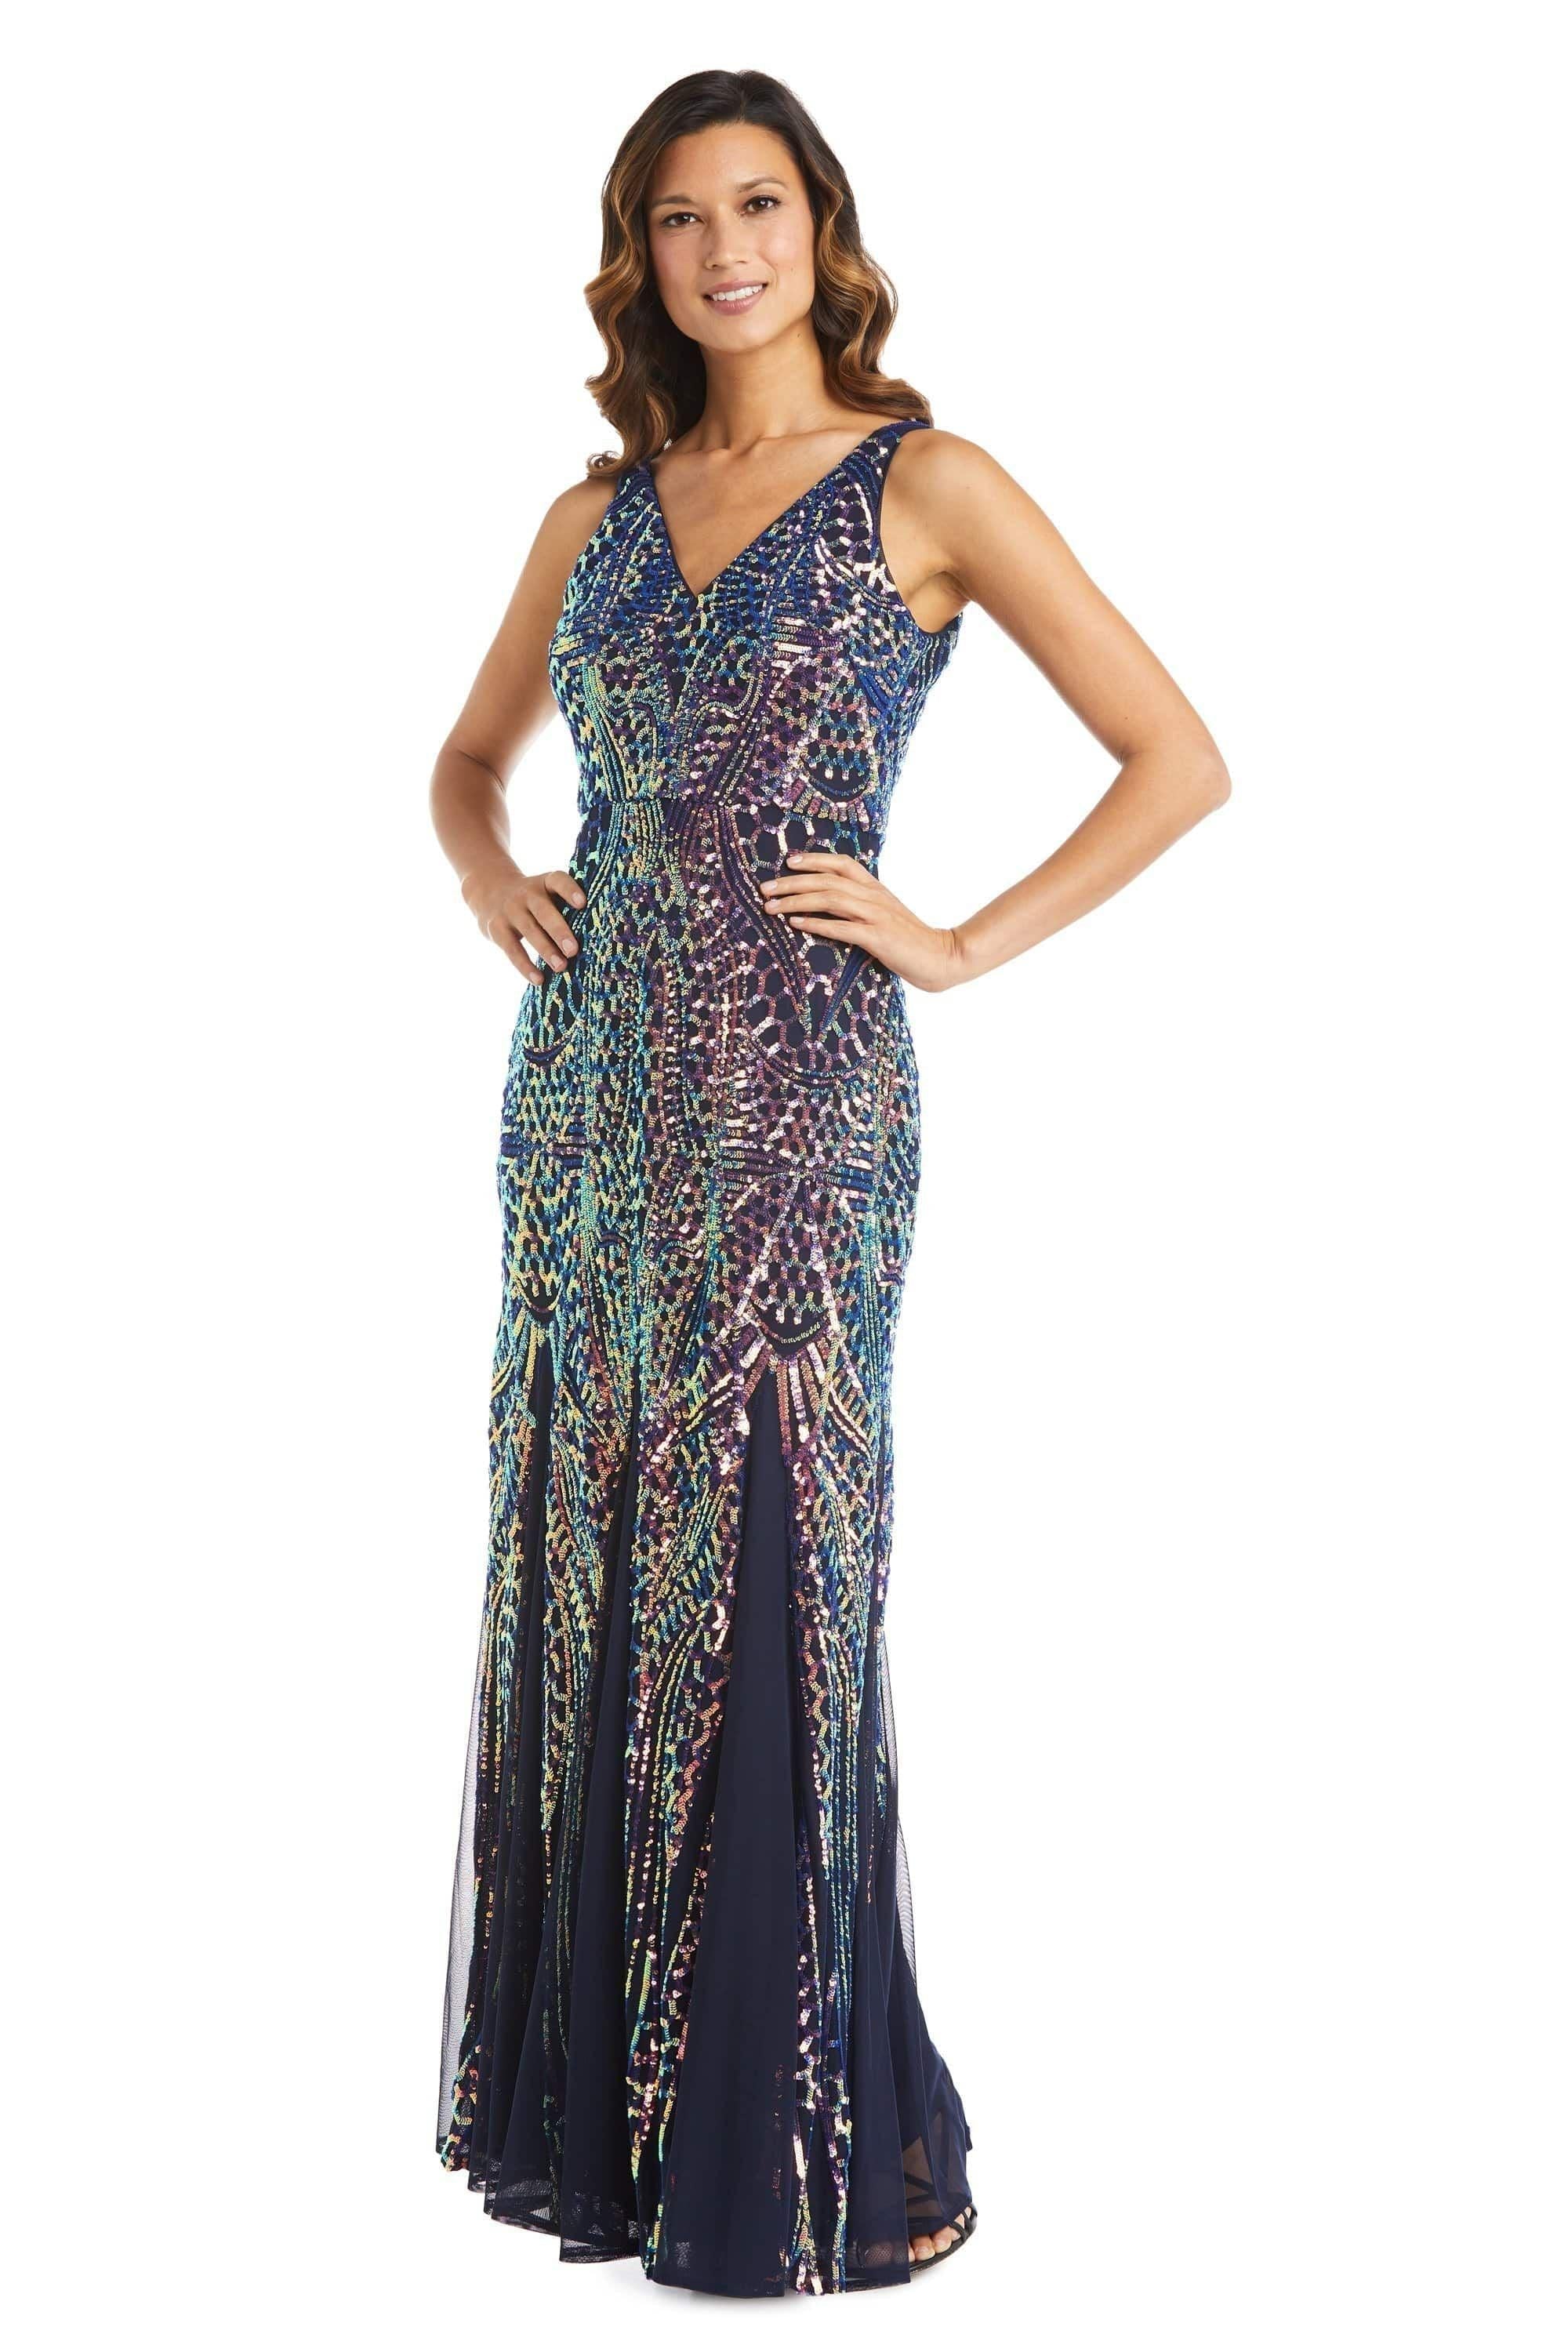 Nightway Sequin Petite Prom Gown Sale 22024P - The Dress Outlet